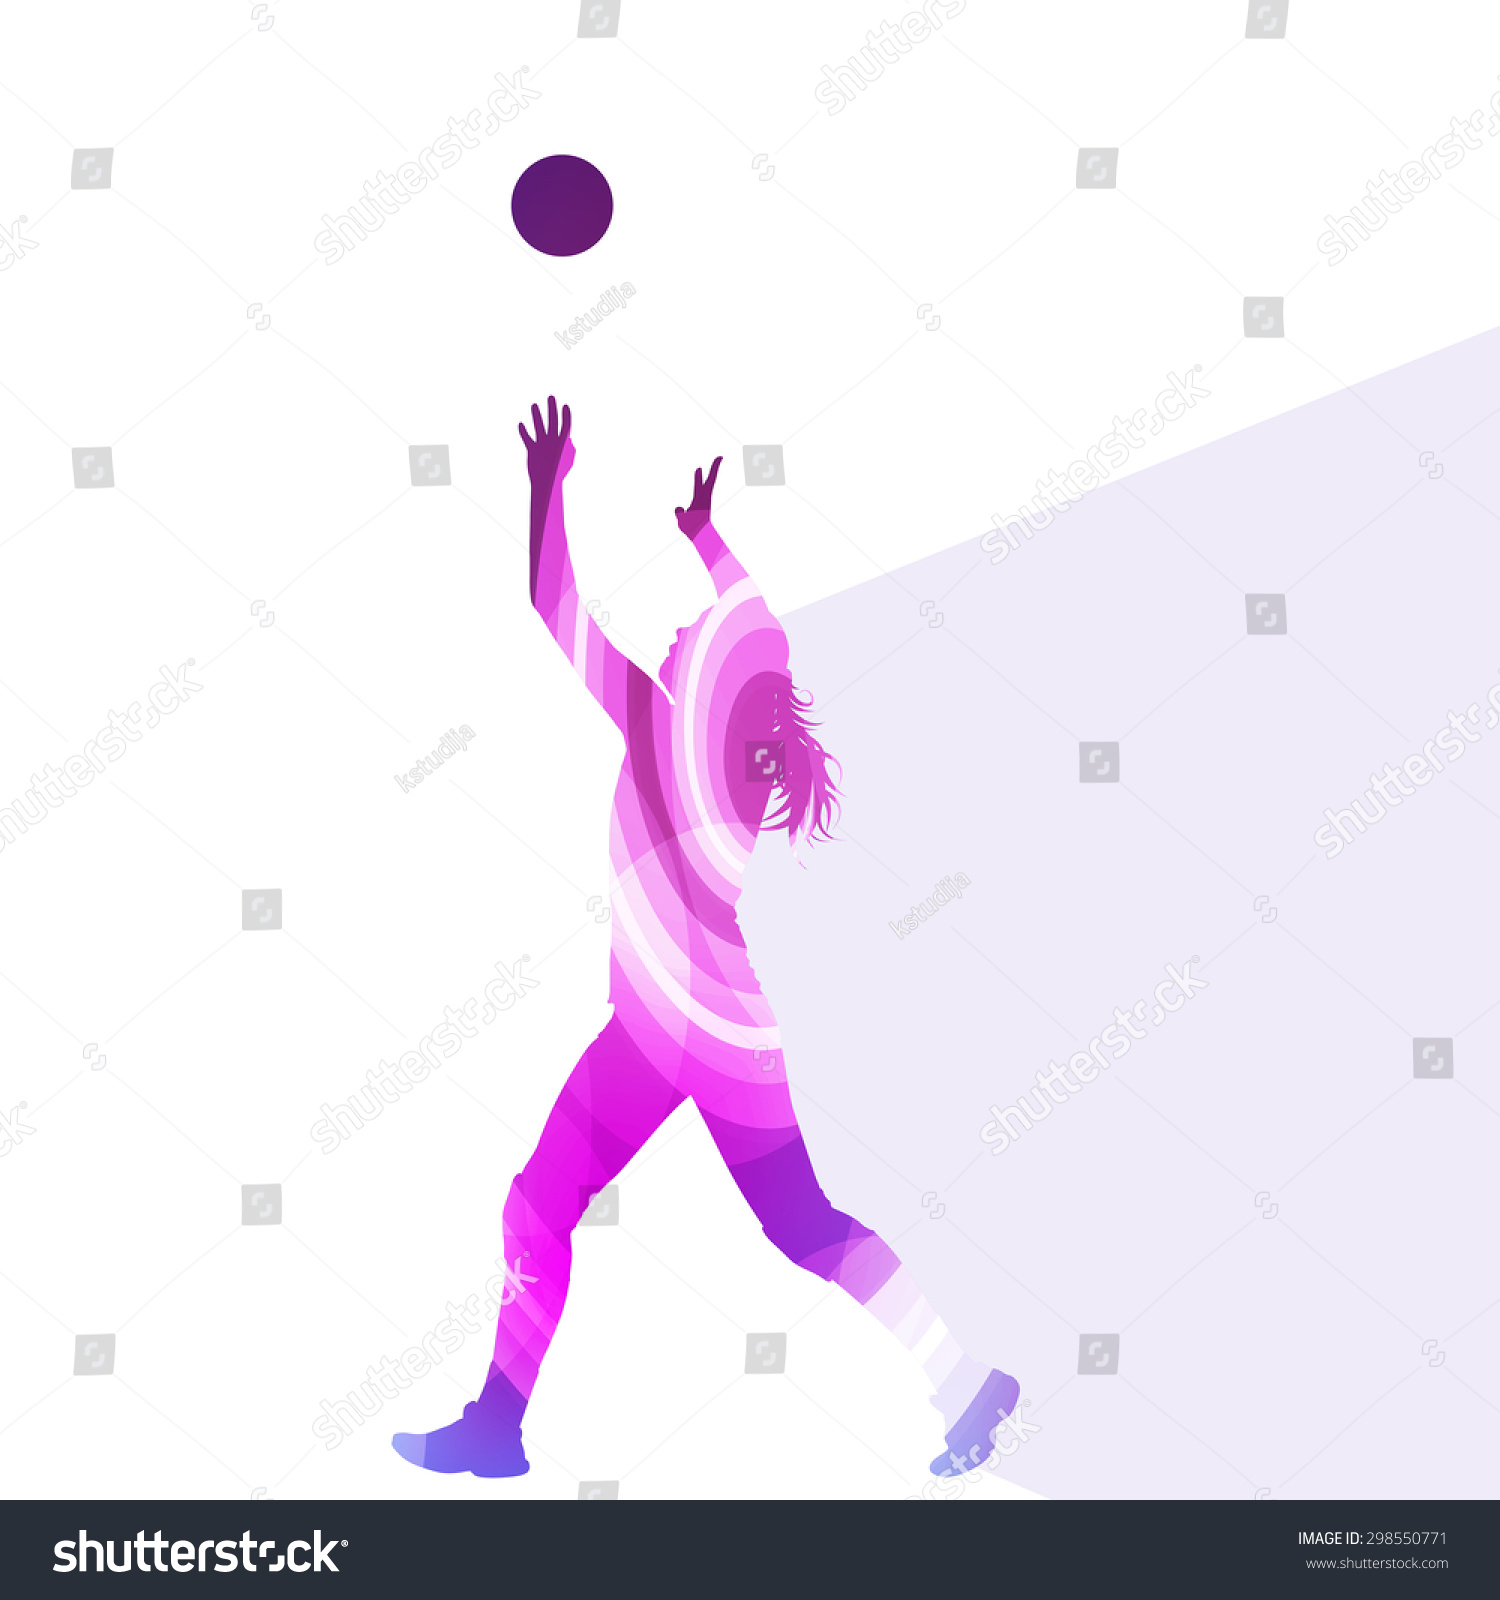 volleyball clipart with no background - photo #37